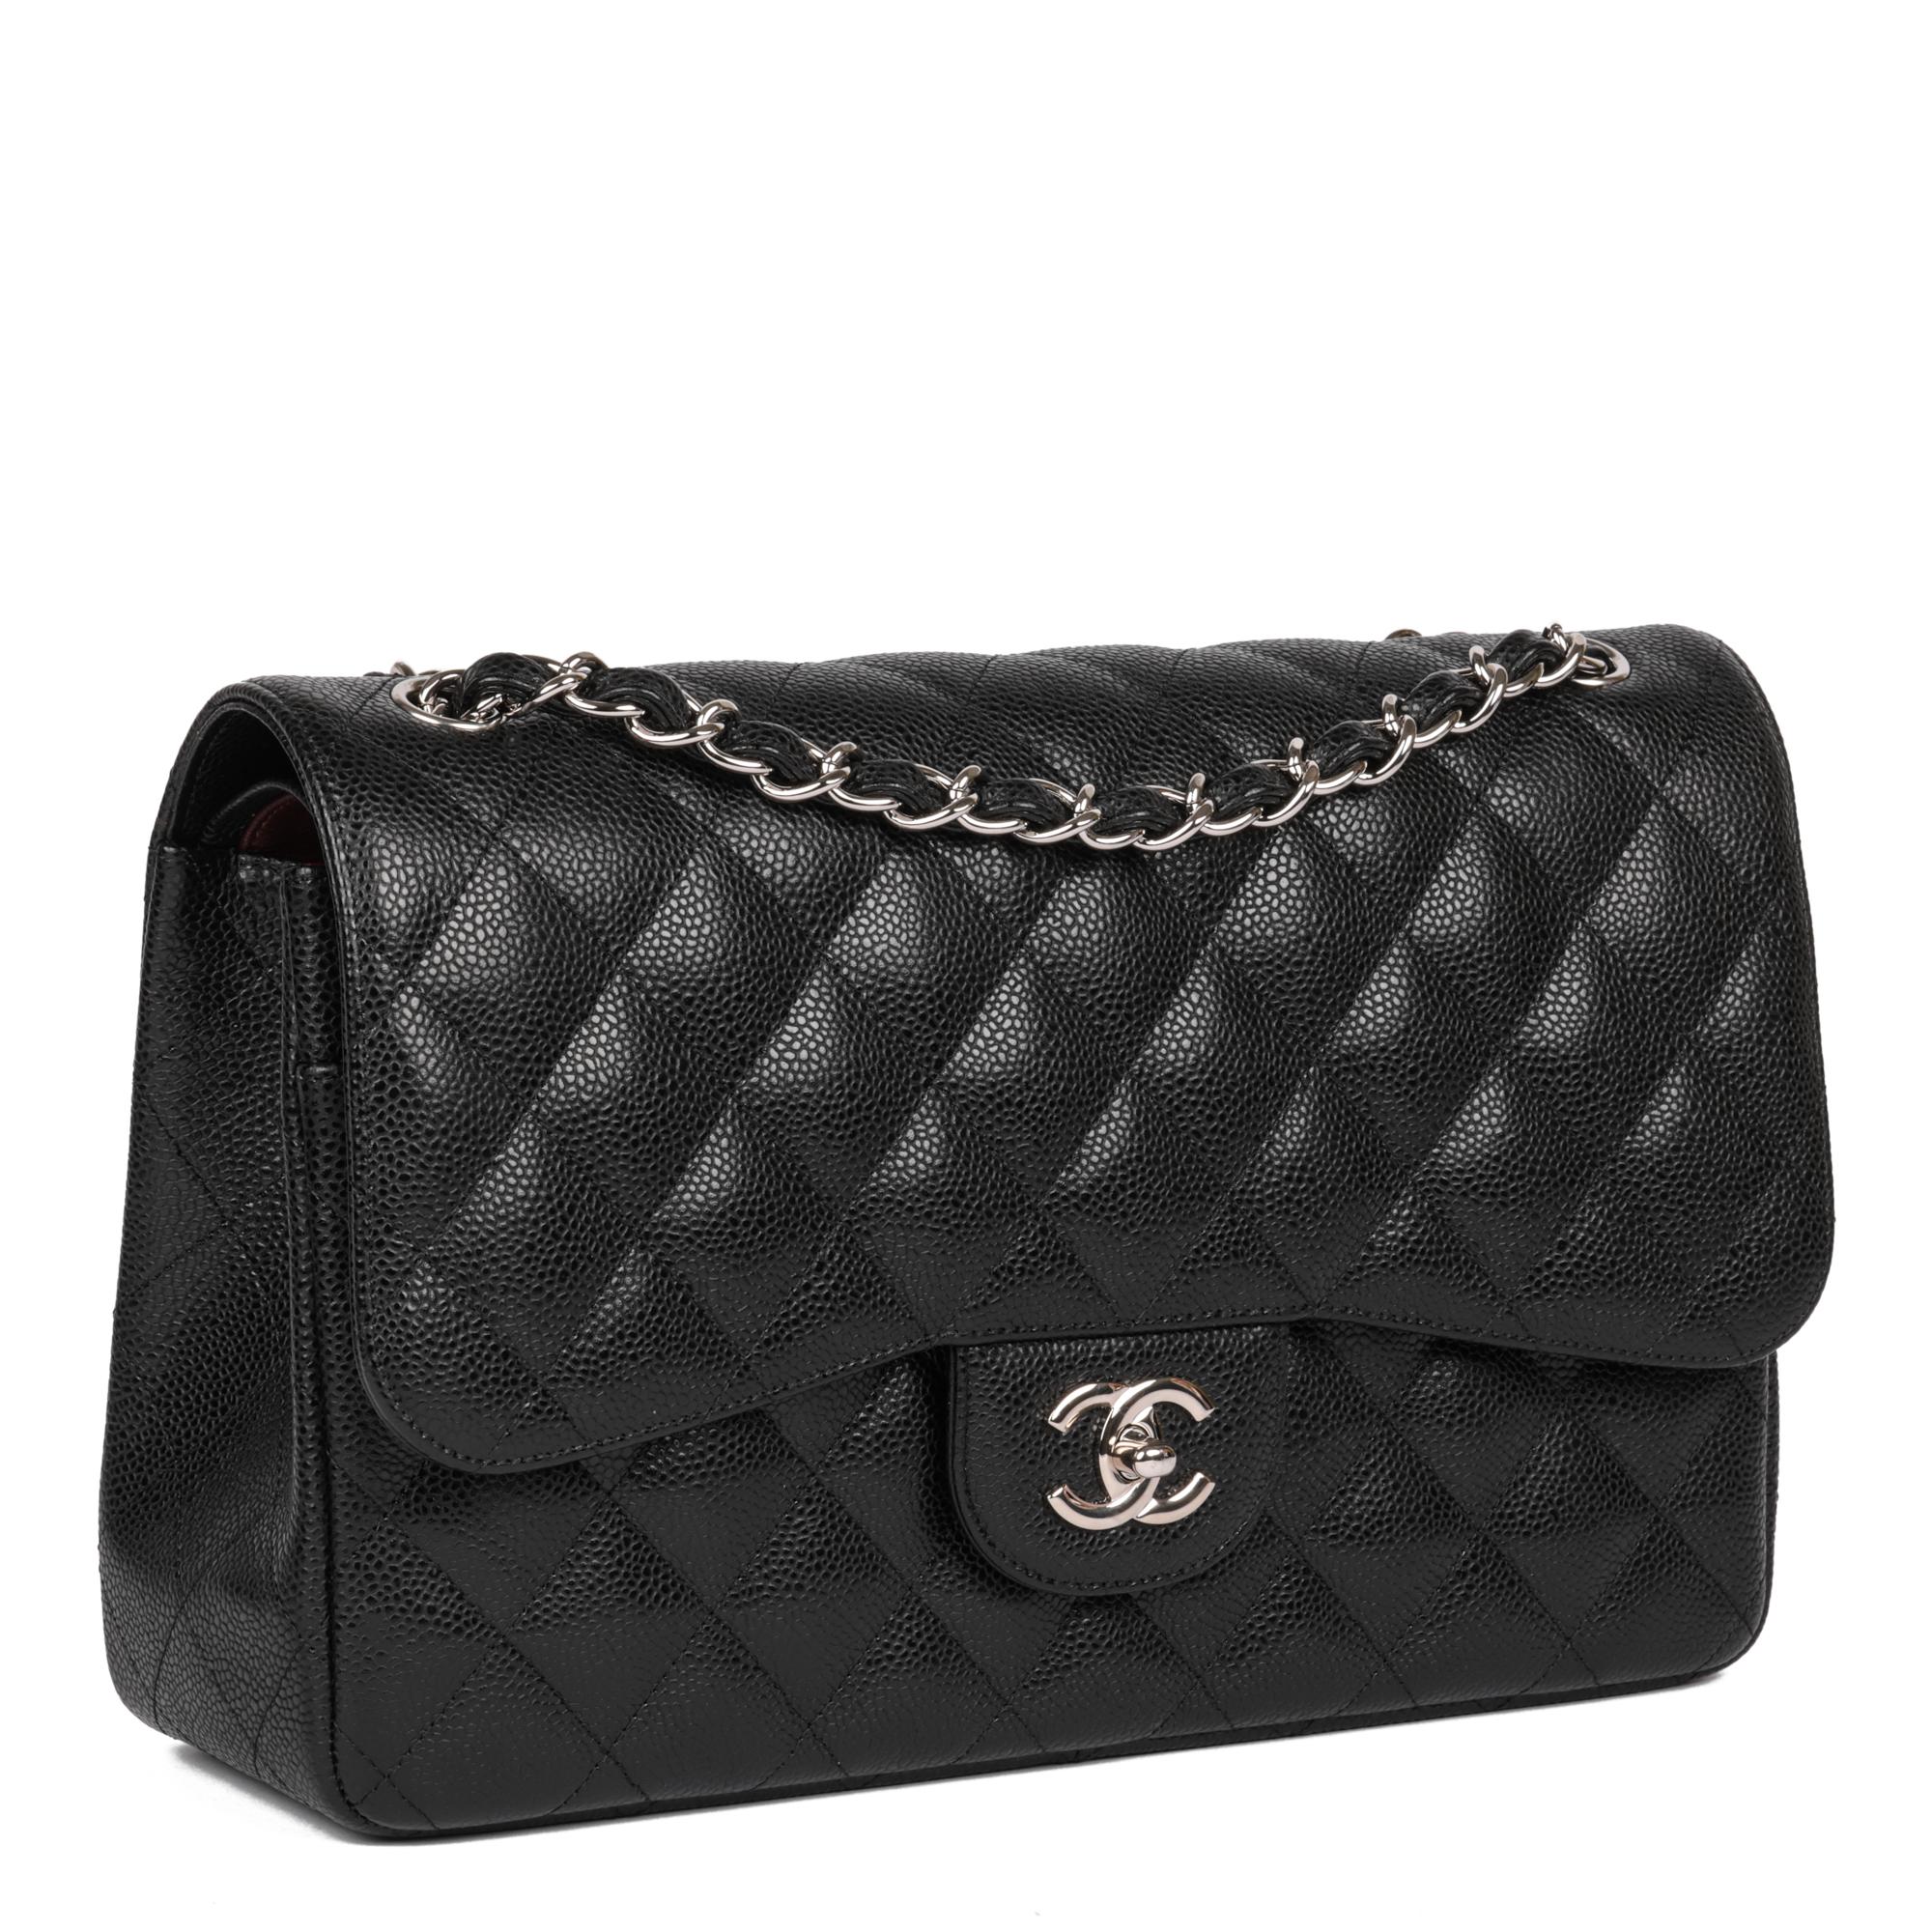 CHANEL
Black Quilted Caviar Leather Jumbo Classic Double Flap Bag 

Xupes Reference: HB5164
Serial Number: 14938533
Age (Circa): 2012
Accompanied By: Chanel Dust Bag, Box, Authenticity Card, Chanel Receipt, Ribbon
Authenticity Details: Authenticity